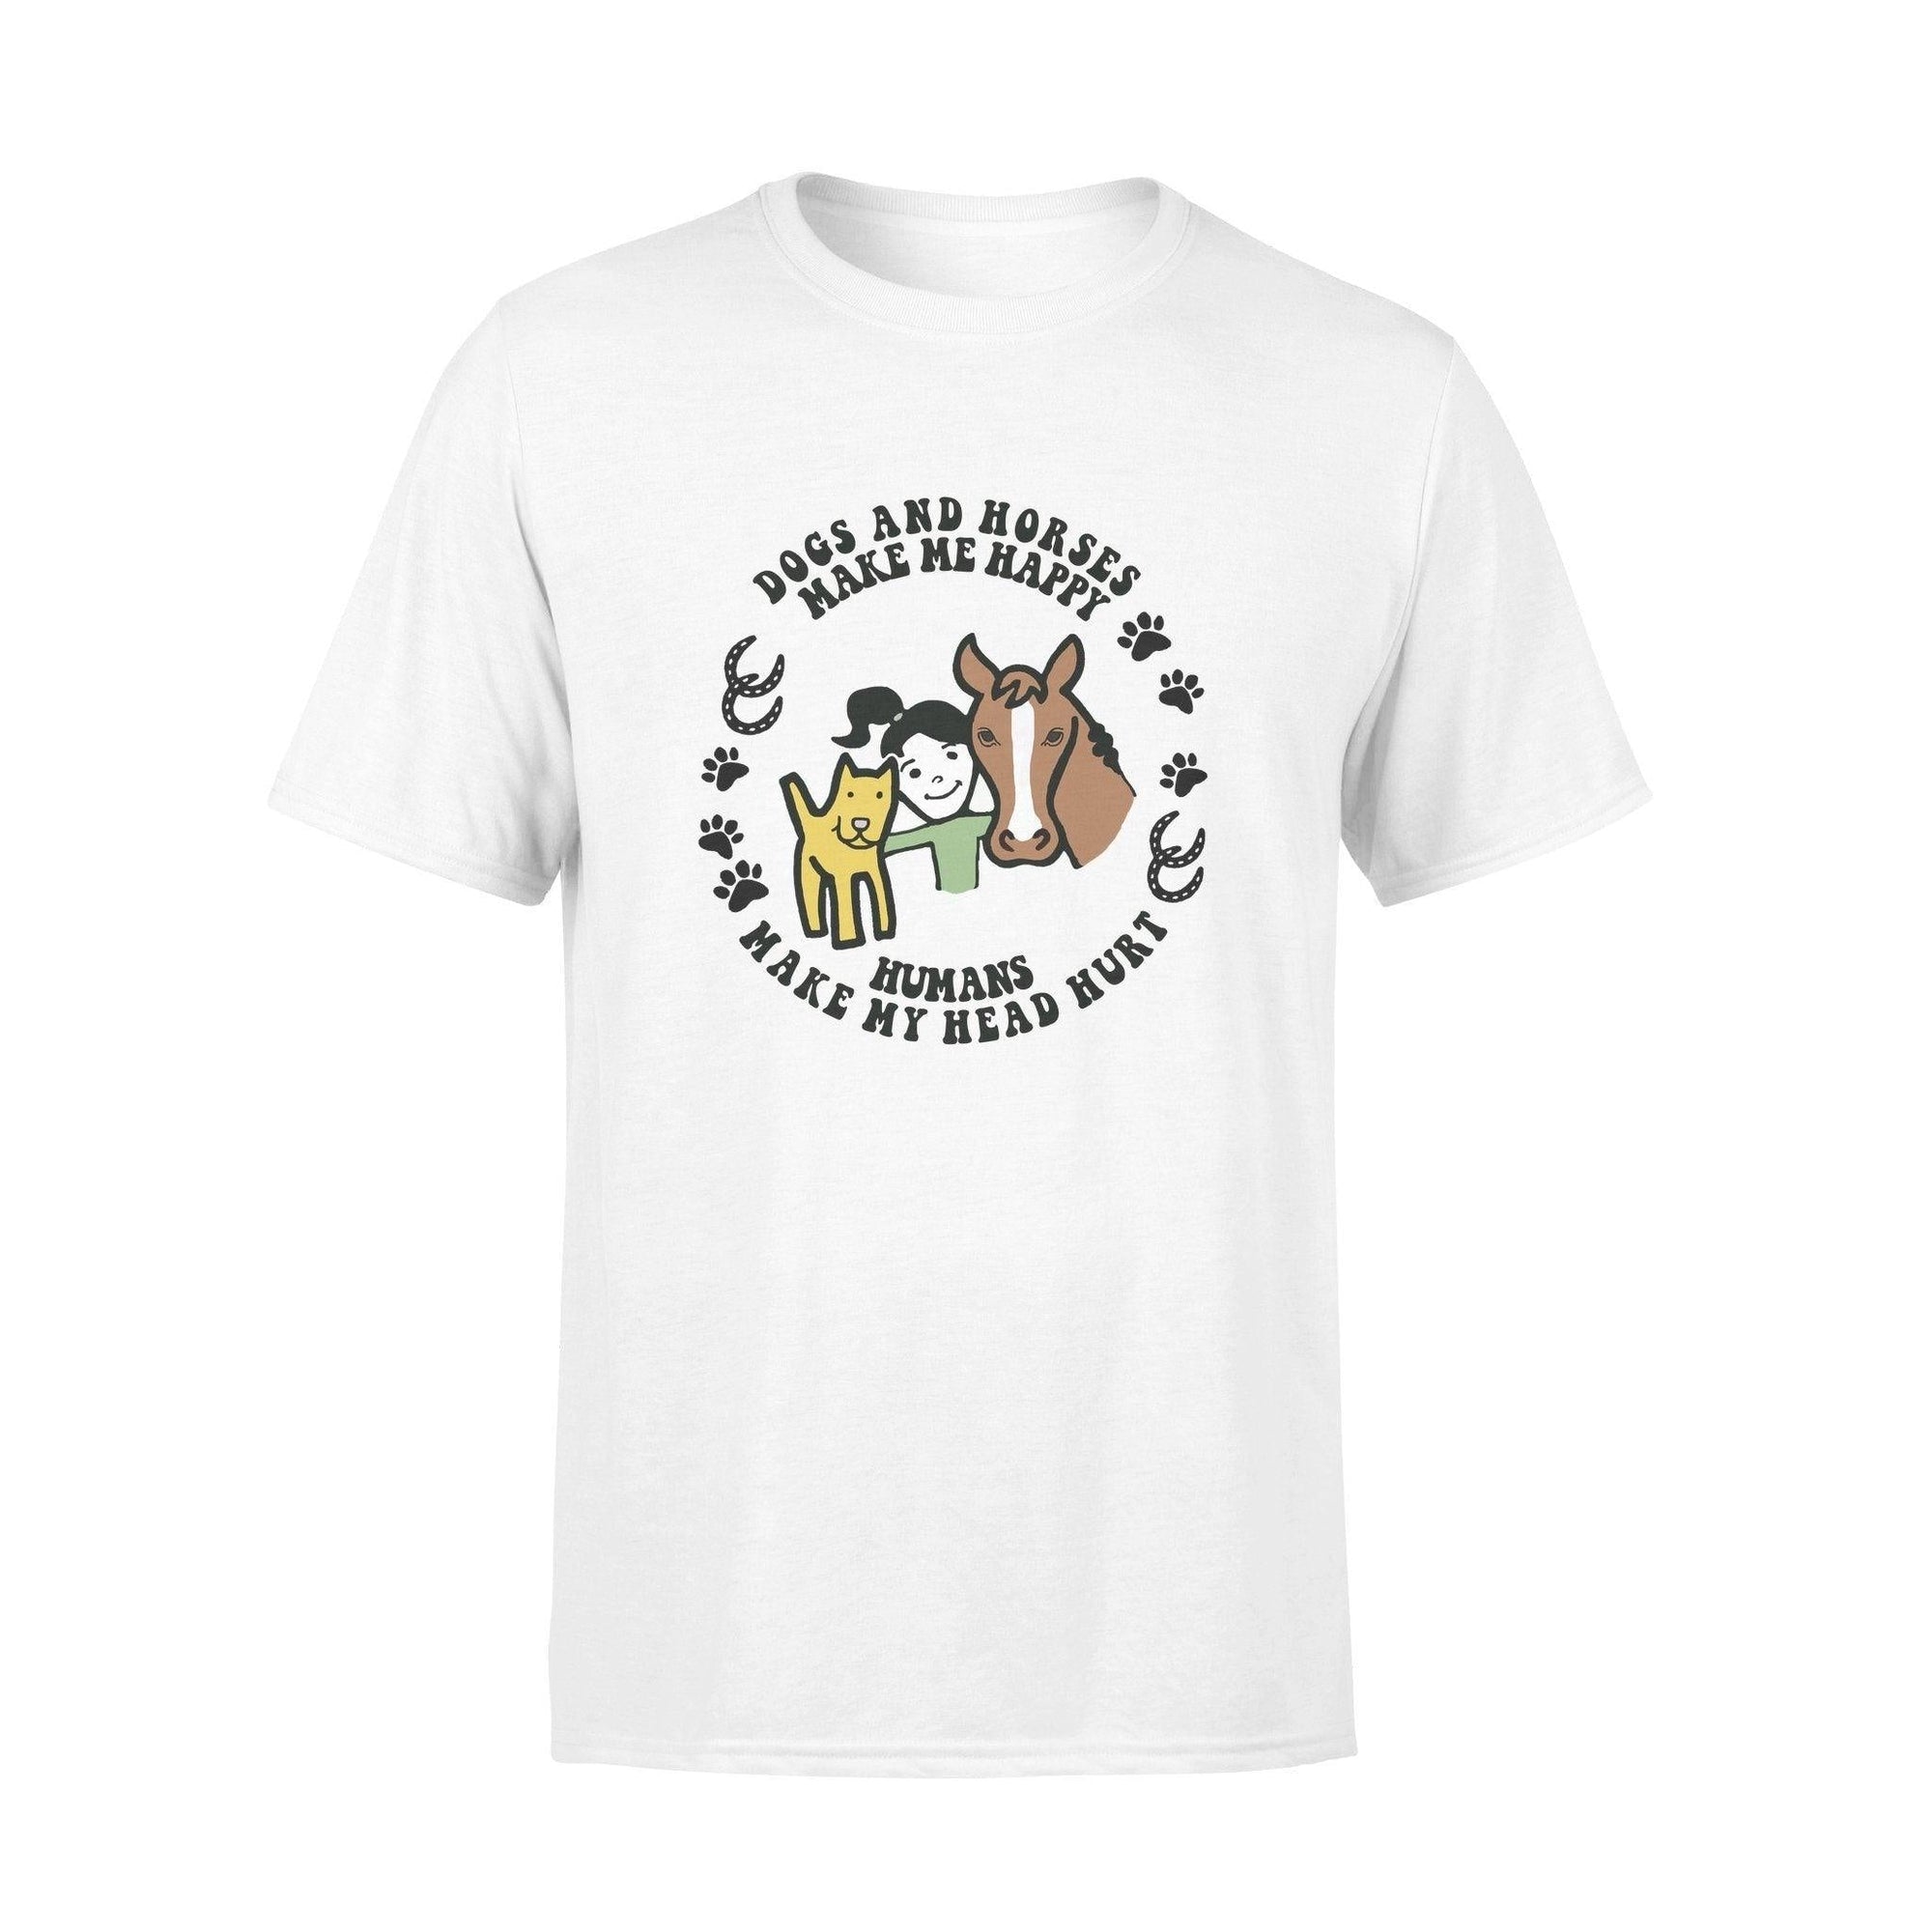 Dog, Horse Dog and Horse - Standard T-shirt - PERSONAL84